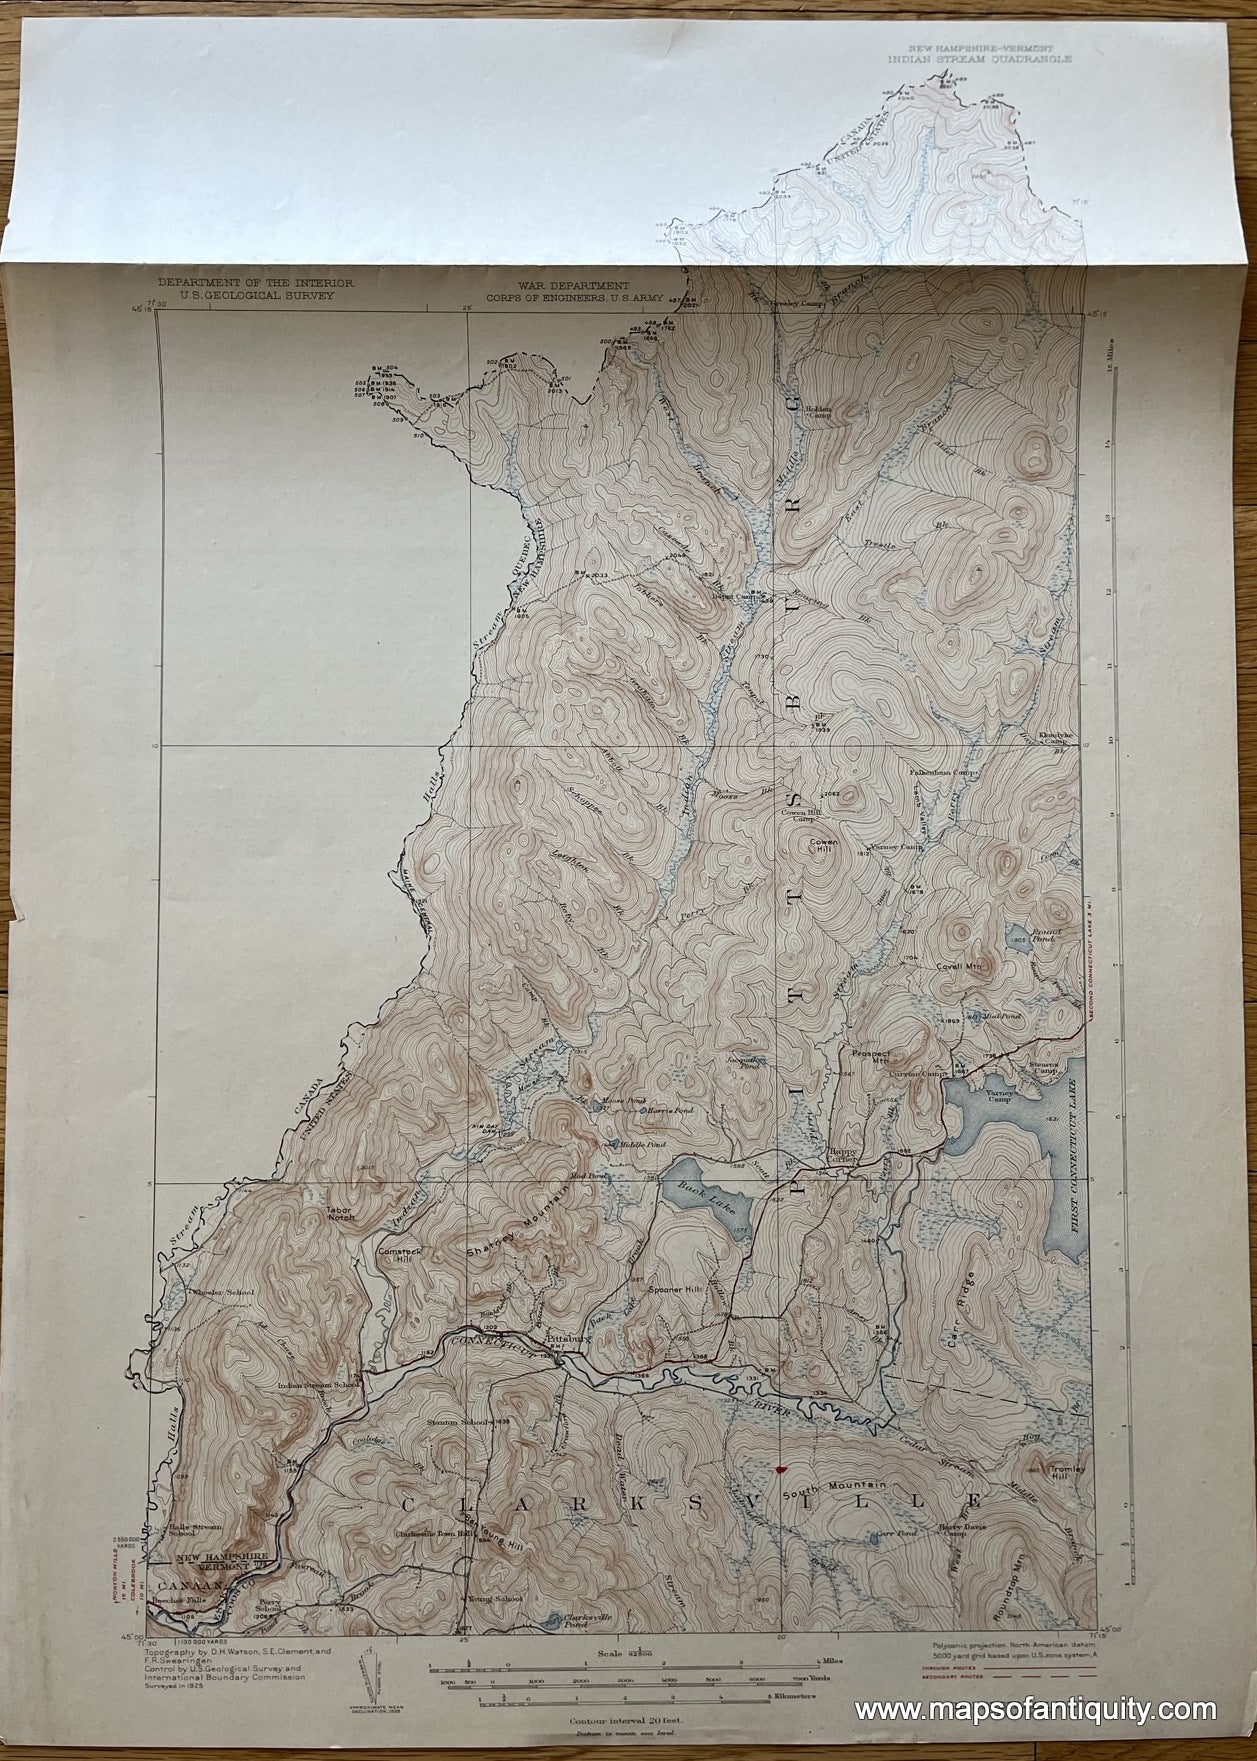 Genuine-Antique-Topographical-Map-Indian-Stream-Quadrangle-NH-Topo-Map-1927-USGS-U-S--Geological-Survey-Maps-Of-Antiquity